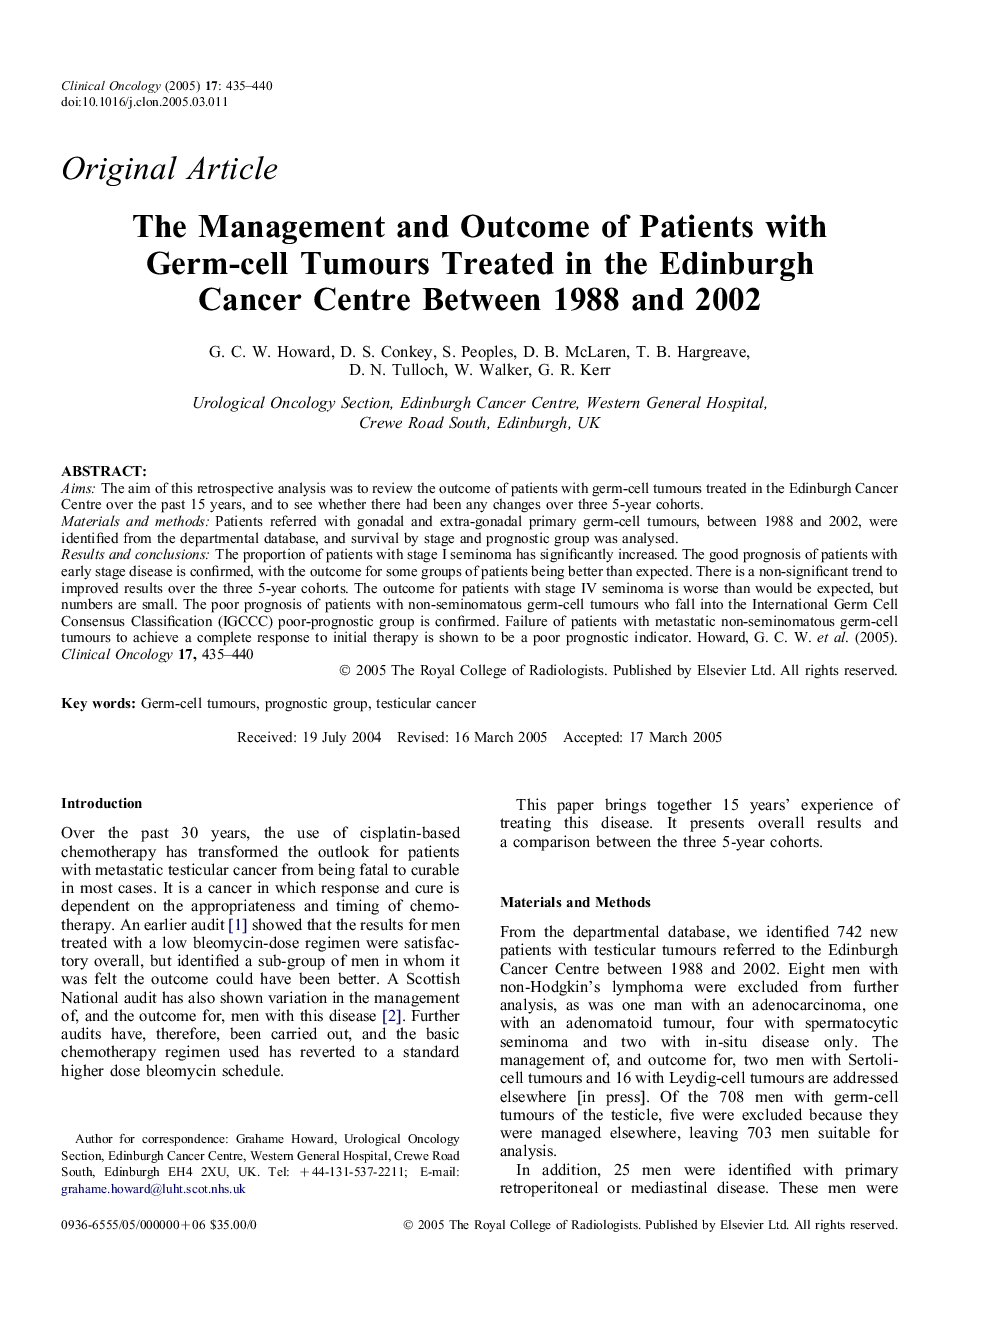 The Management and Outcome of Patients with Germ-cell Tumours Treated in the Edinburgh Cancer Centre Between 1988 and 2002